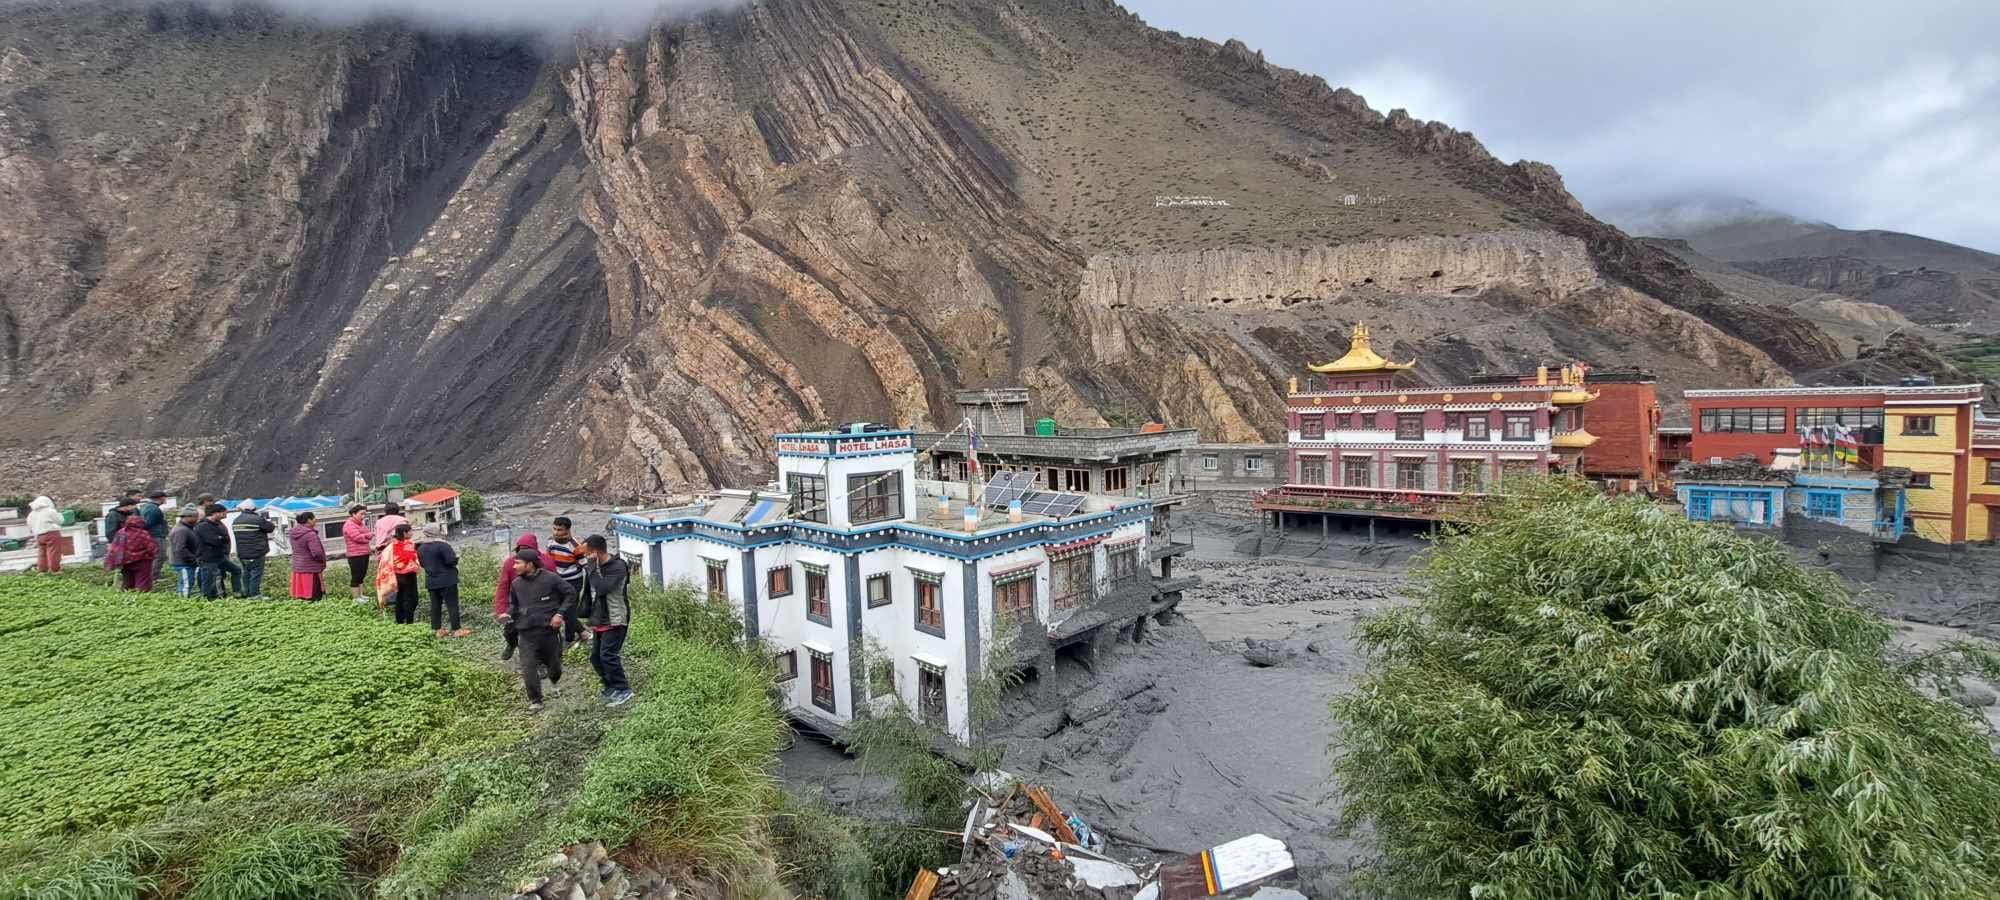 Over 400,000 tourists visit Mustang by road in past year